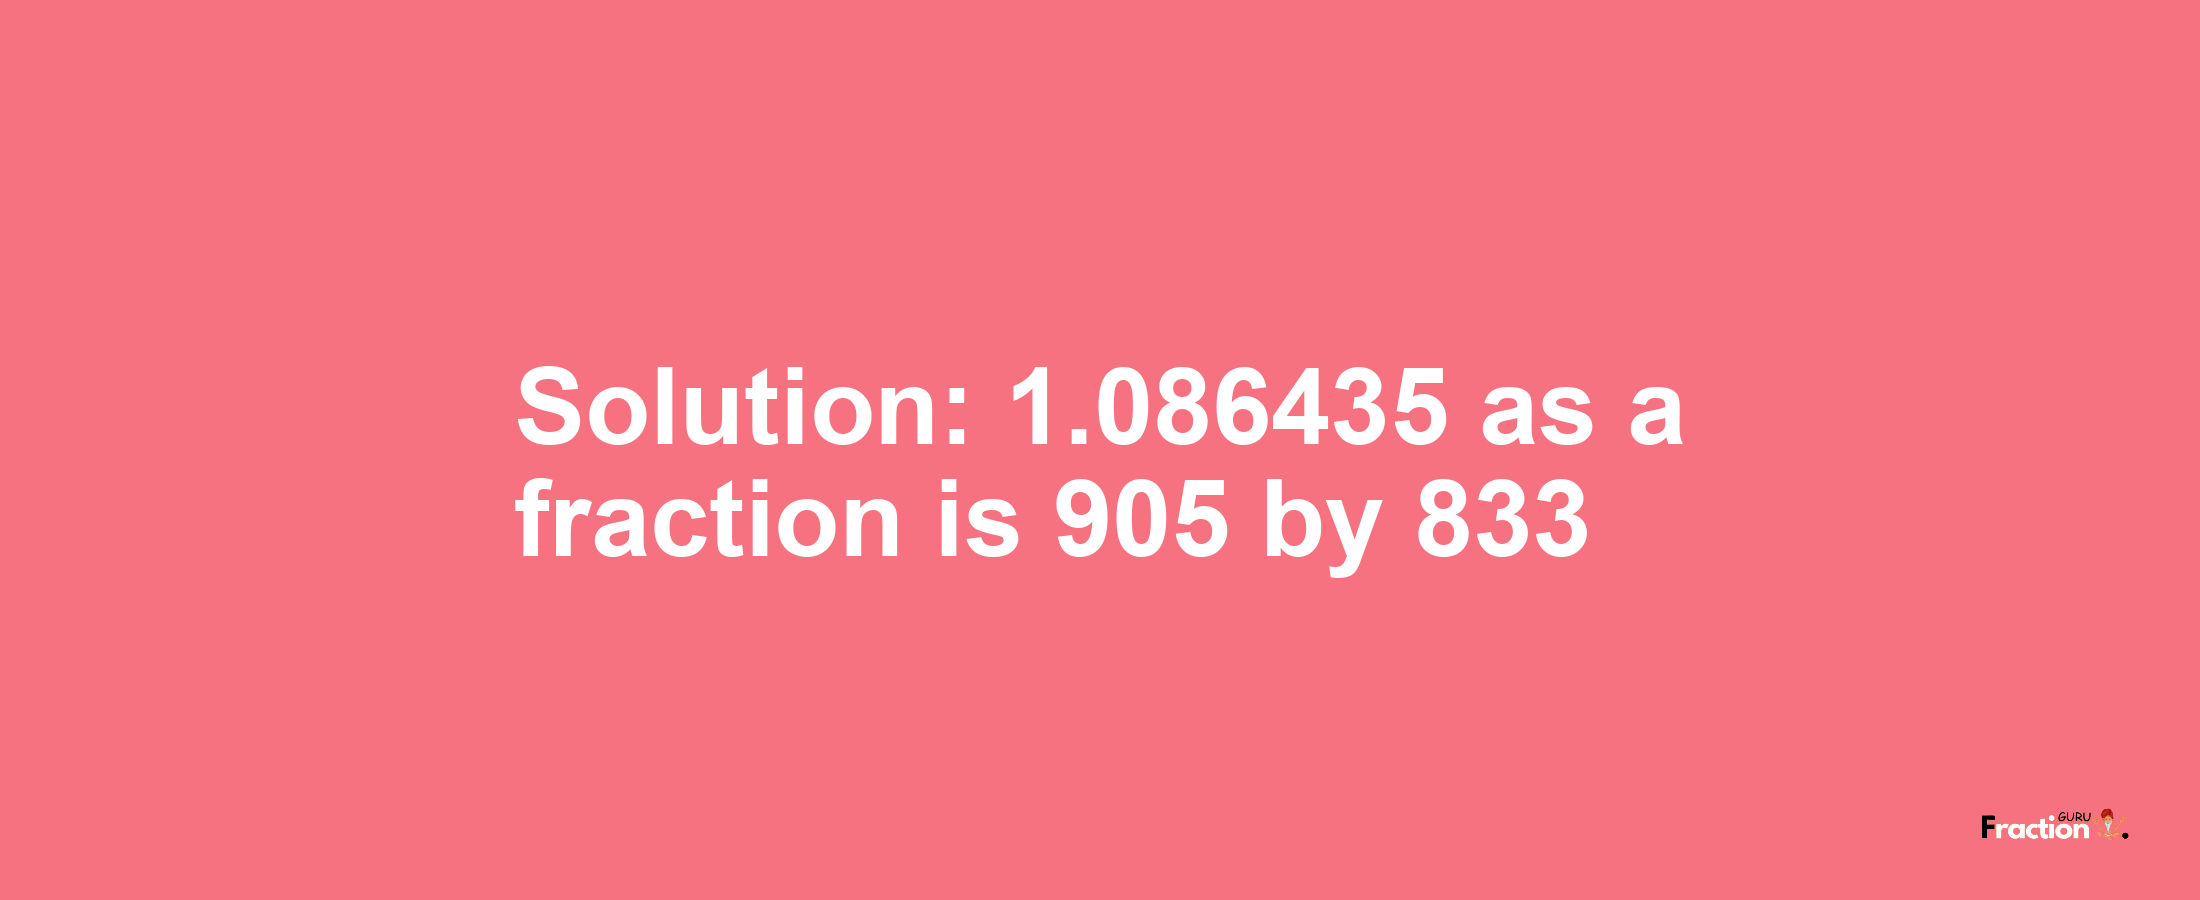 Solution:1.086435 as a fraction is 905/833